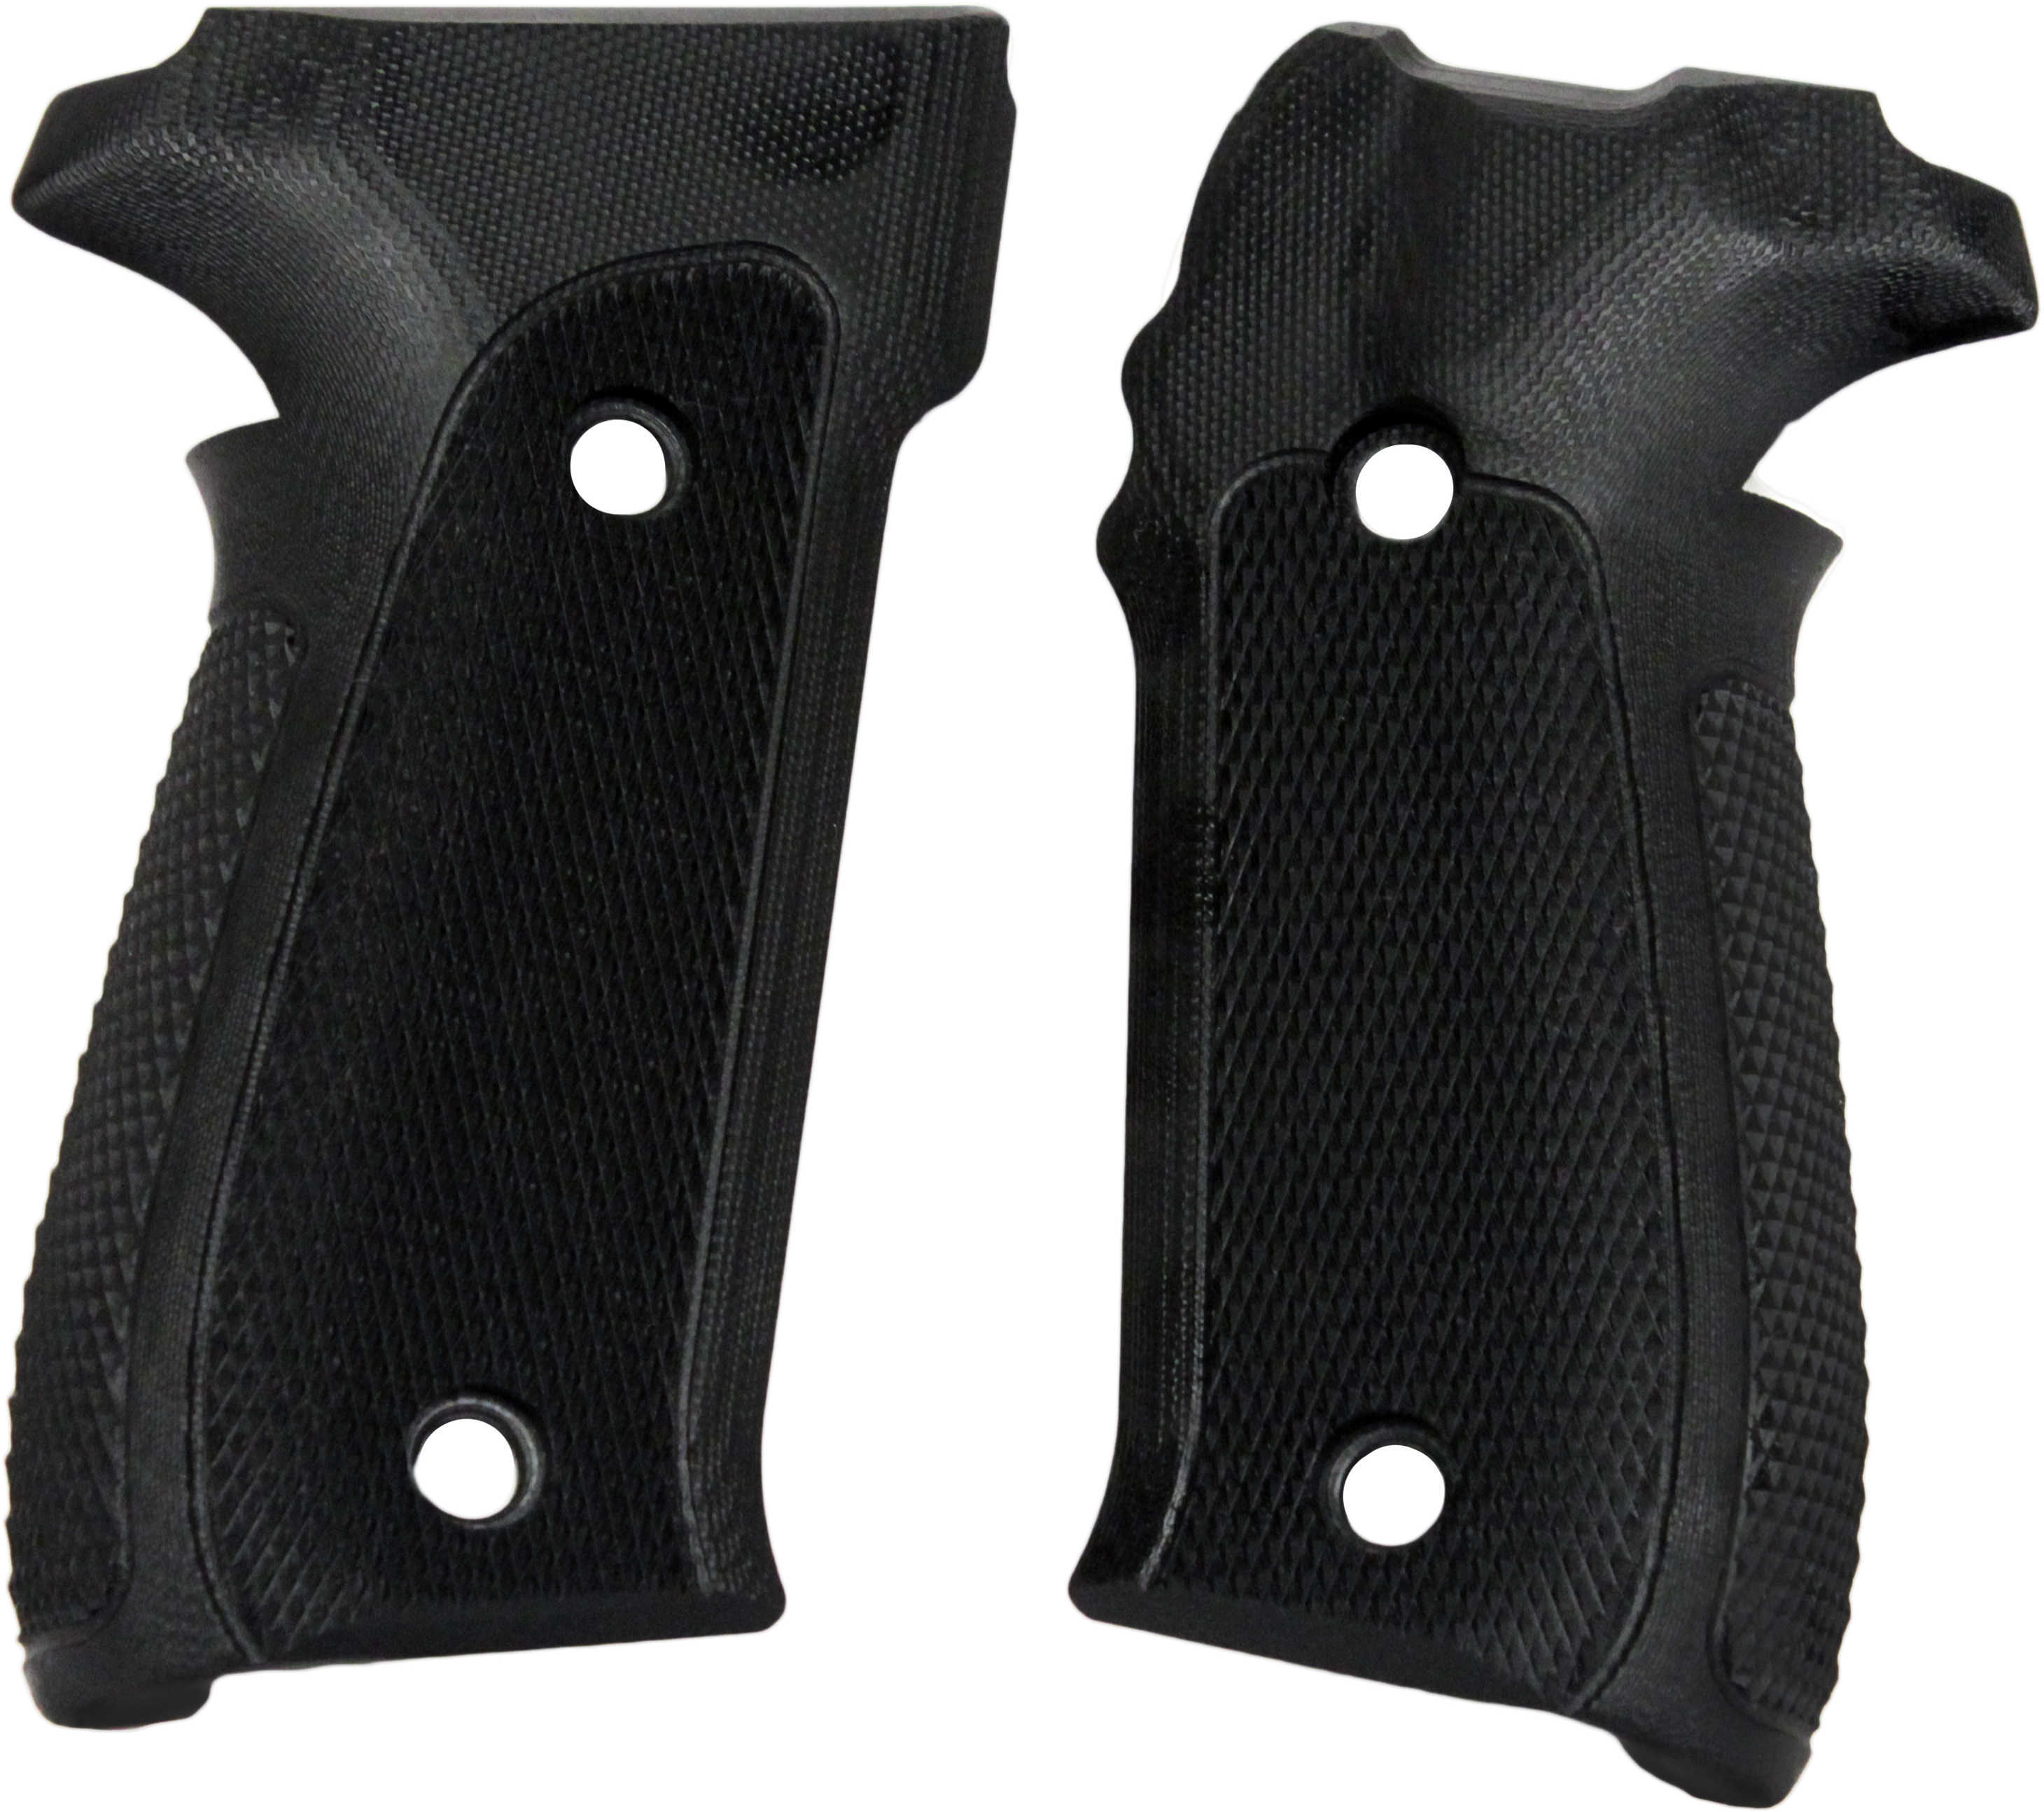 Hogue Sig P226 Grips Checkered G-10 Solid Black 26179